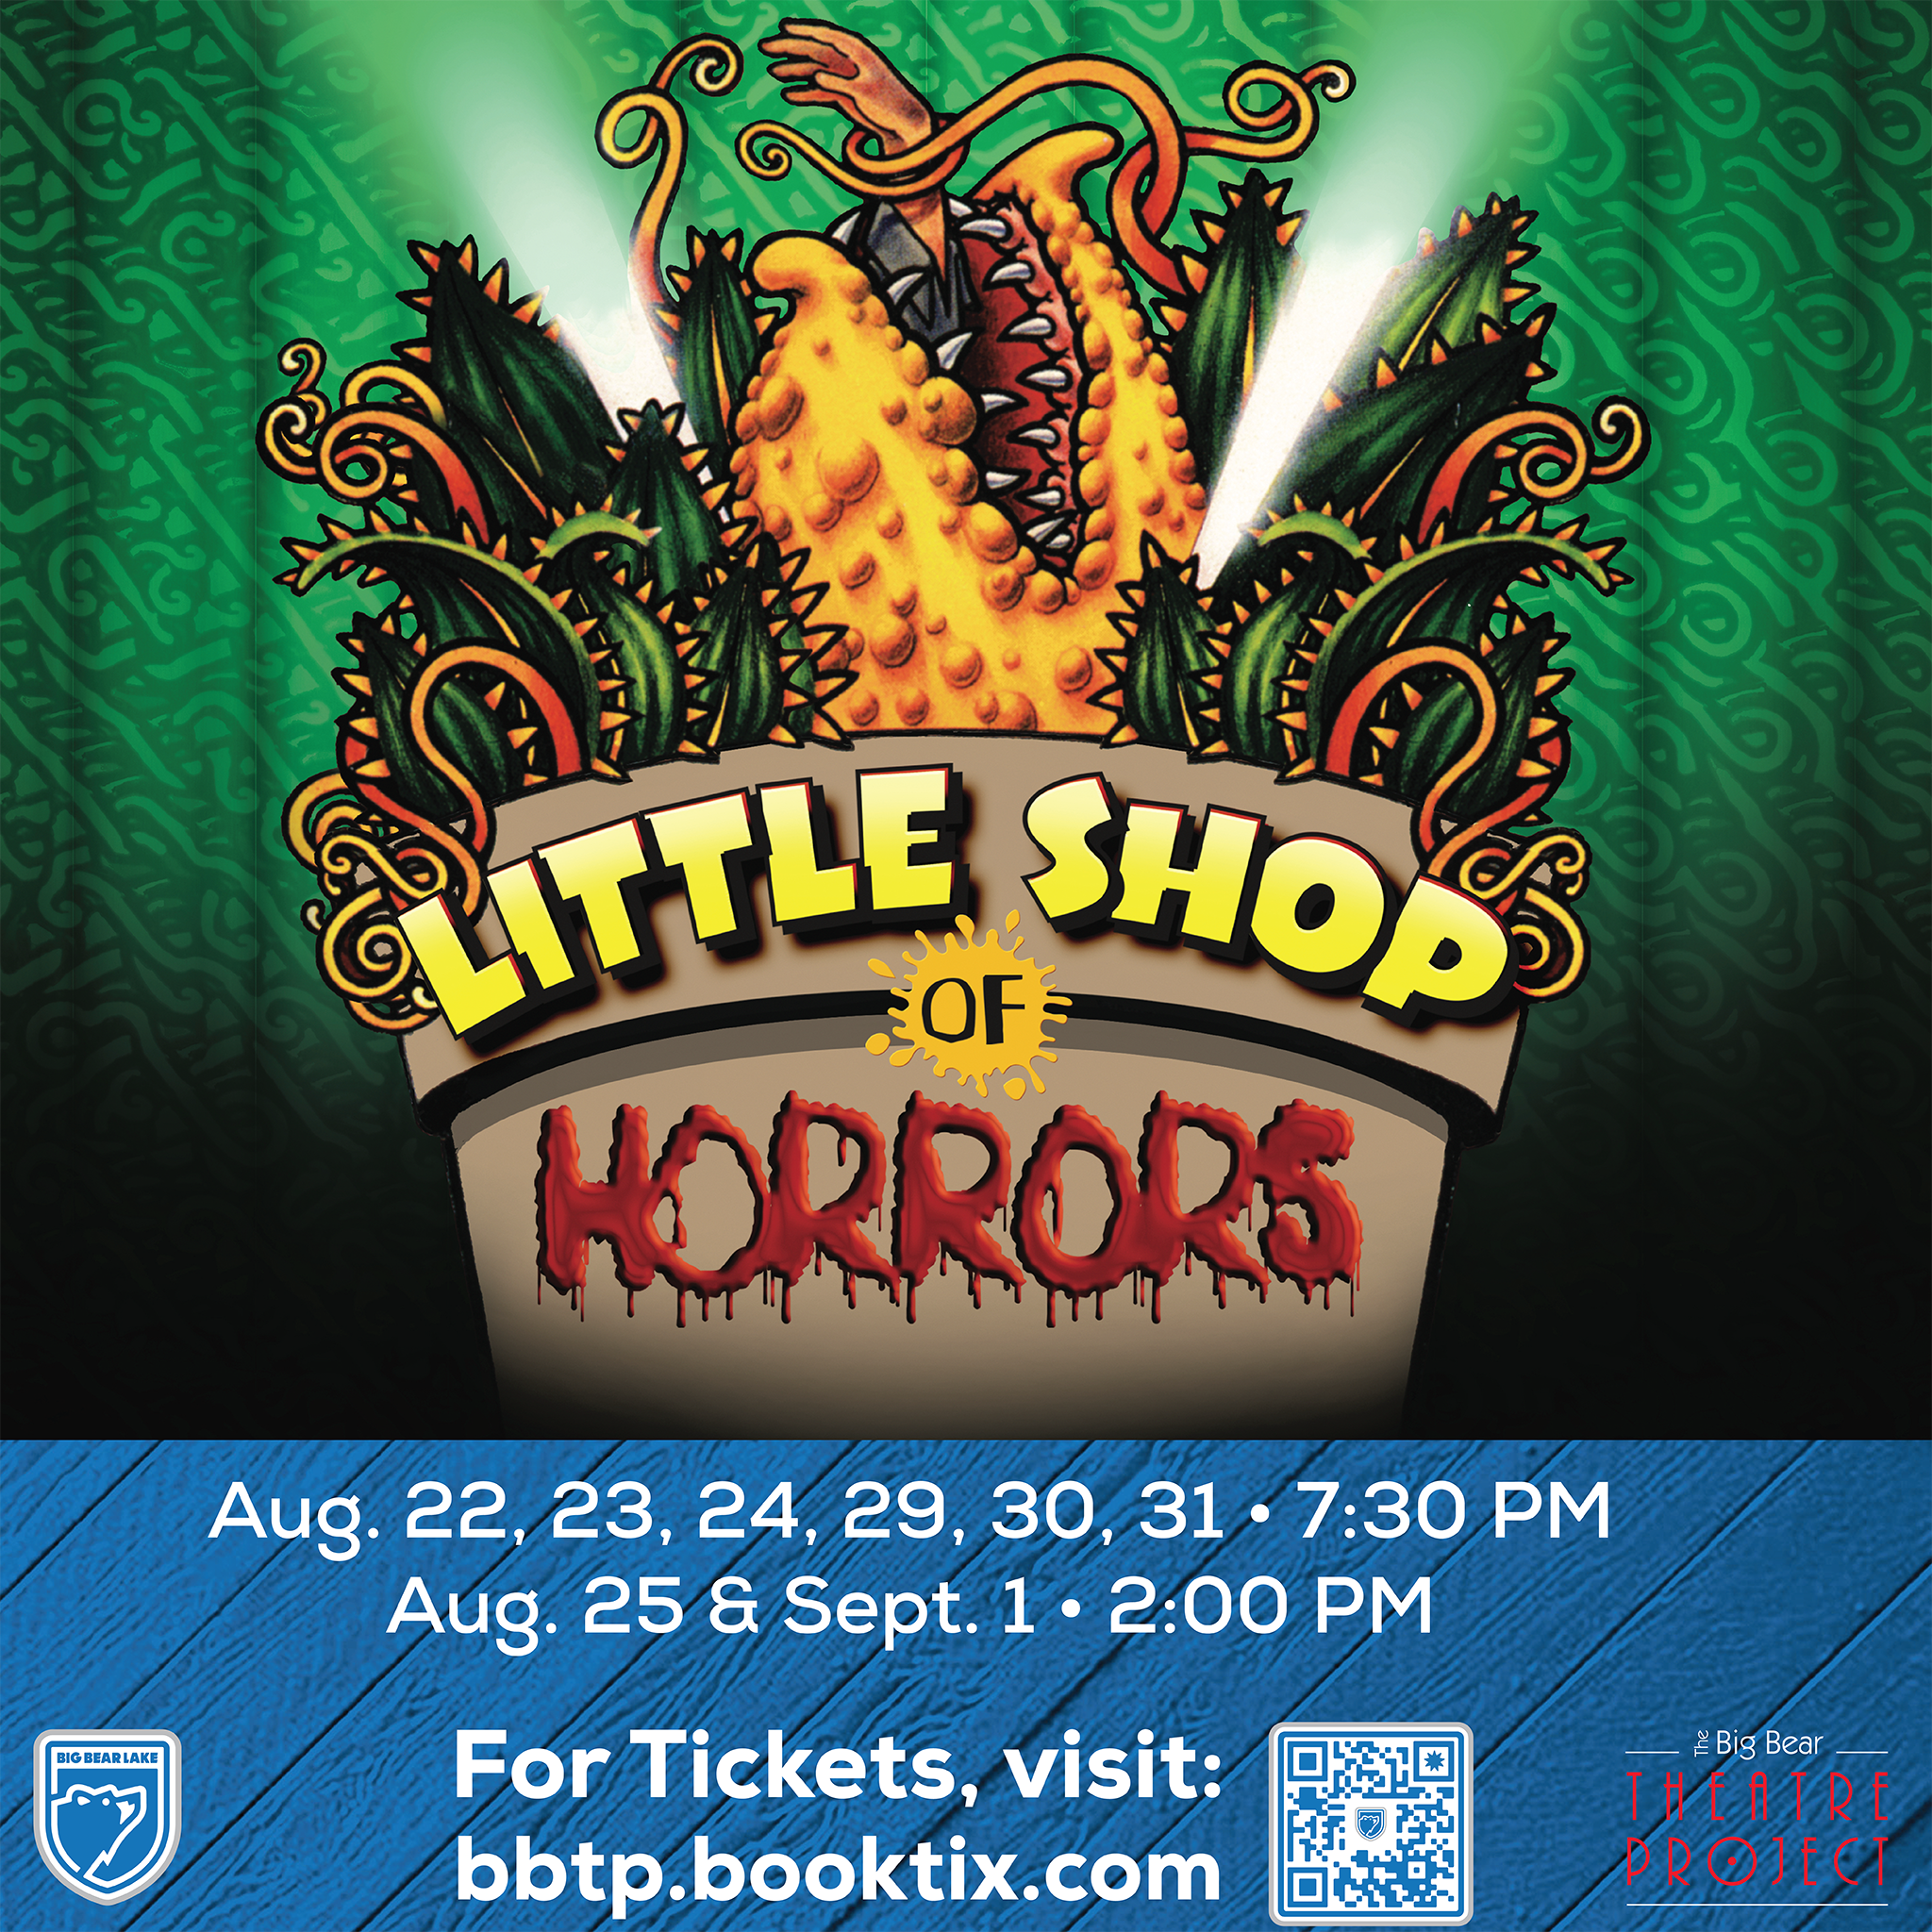 LITTLE SHOP OF HORRORS at Big Bear #AD